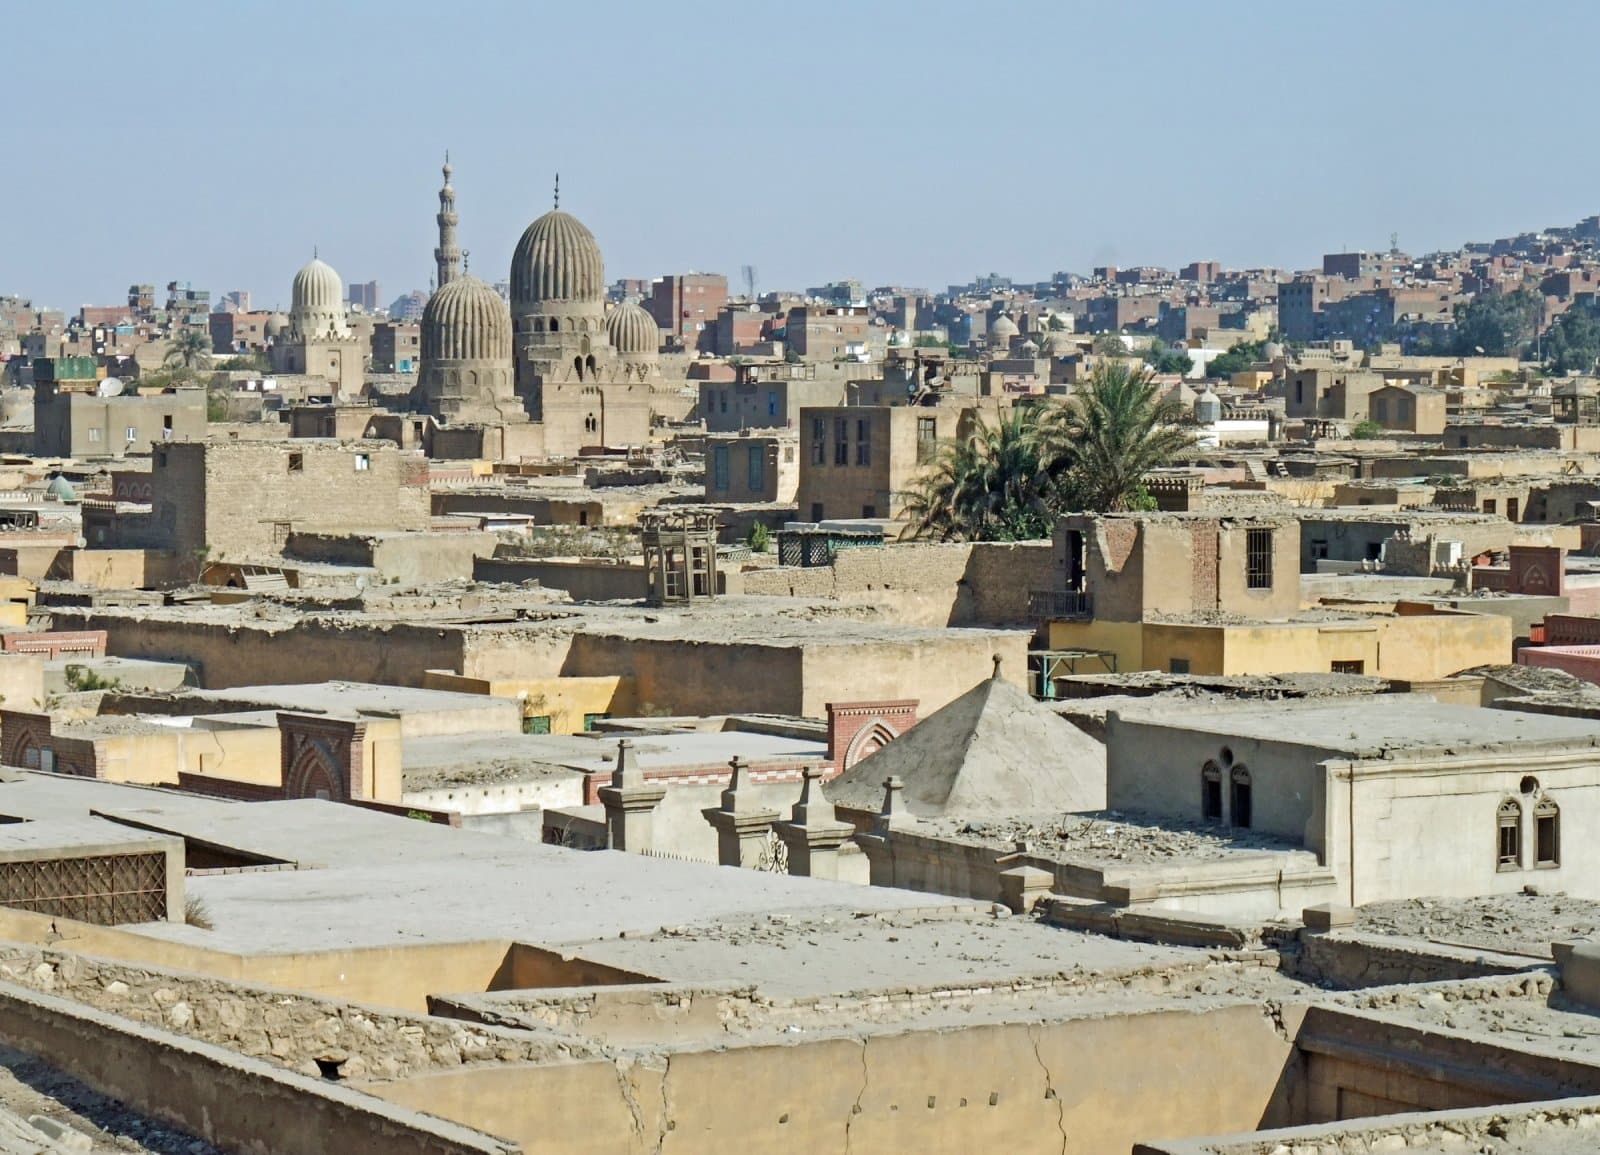 <p class="wp-caption-text">Image Credit: Shutterstock / SF photo</p>  <p><span>The City of the Dead, or Qarafa, is a vast Islamic necropolis that has been a burial ground and a residential area for centuries. Stretching over four miles, it is home to ornate mausoleums, mosques, and tombs dating from the Mamluk era to the present day. This living cemetery offers a unique perspective on Cairo’s history and approach to death and remembrance. The City of the Dead is a place of quiet and reflection, standing in contrast to the bustling streets of Cairo, and provides a profound insight into the city’s social and architectural history.</span> </p>